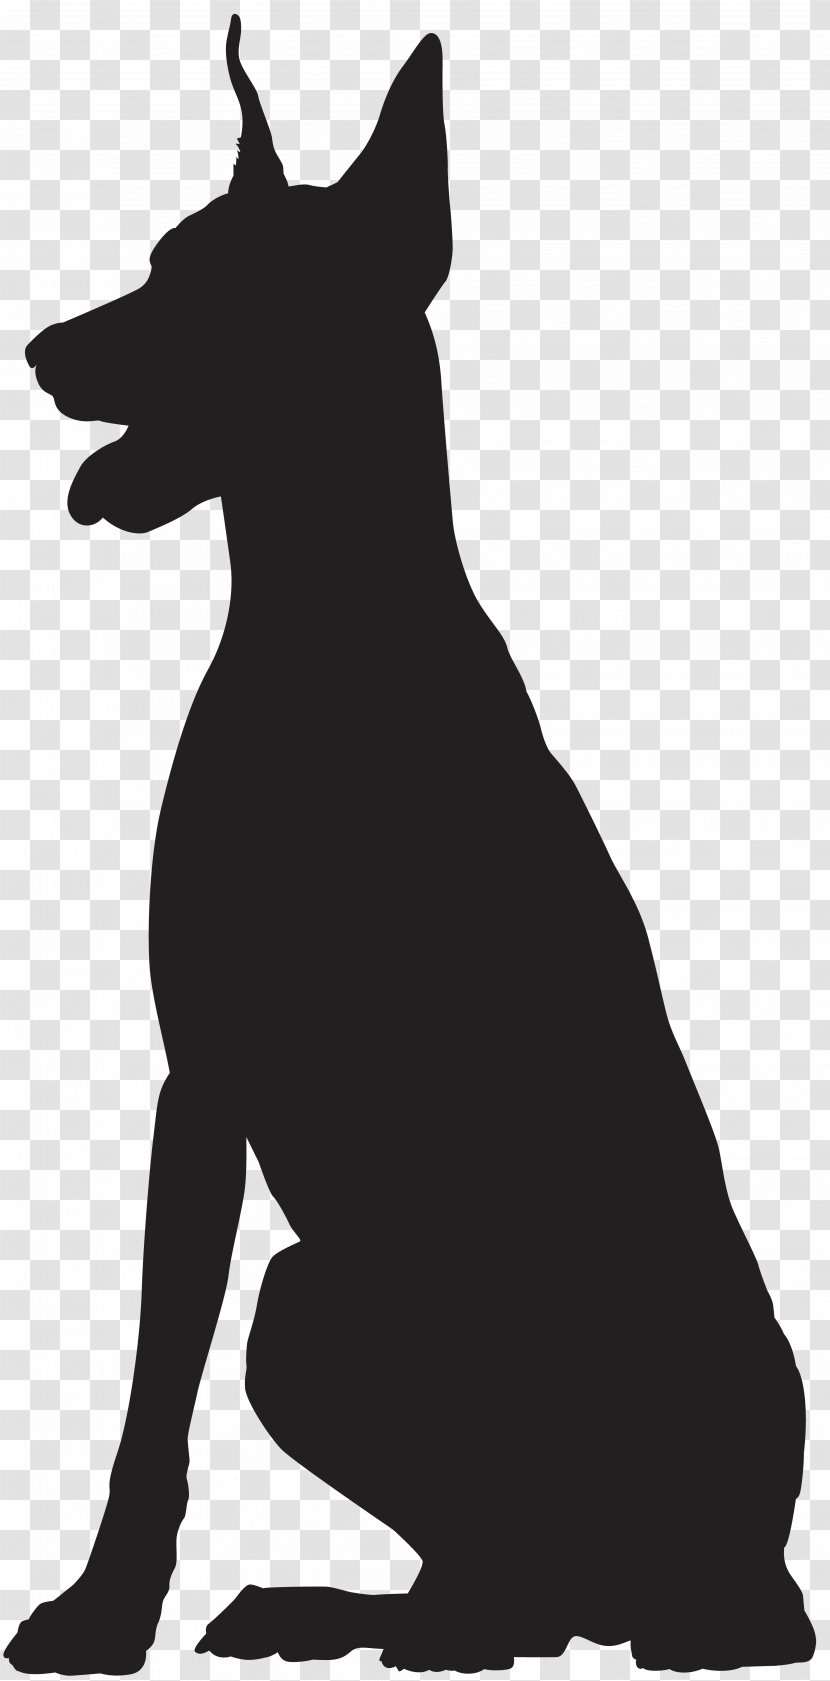 Dog Breed Black And White Snout - Pinscher - Doberman Silhouette Clip Art Image Transparent PNG